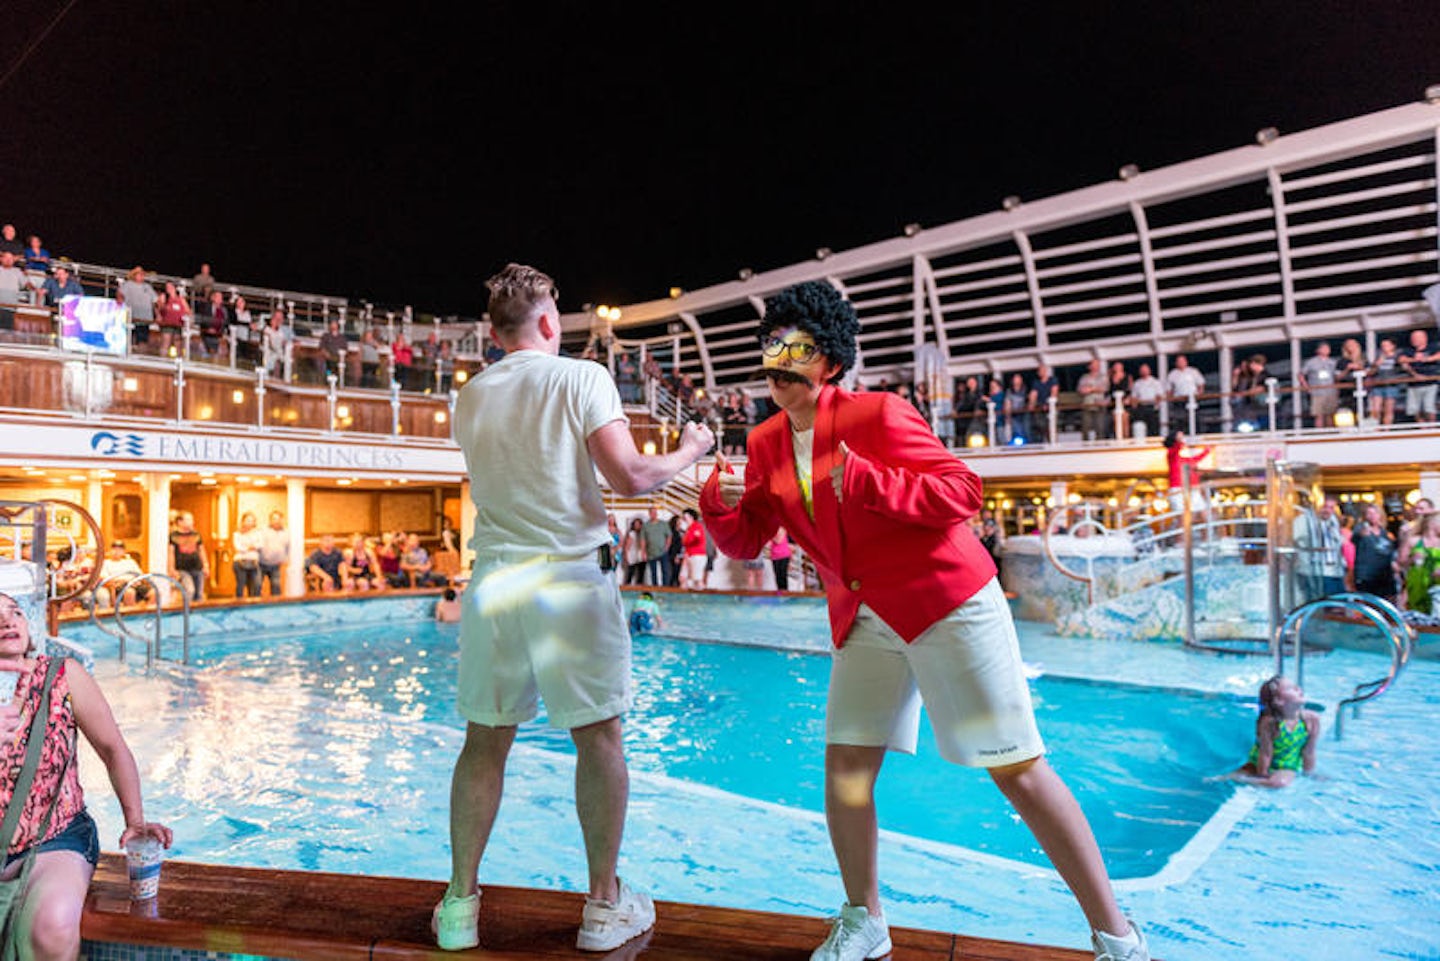 "The Love Boat" Disco Deck Party on Emerald Princess